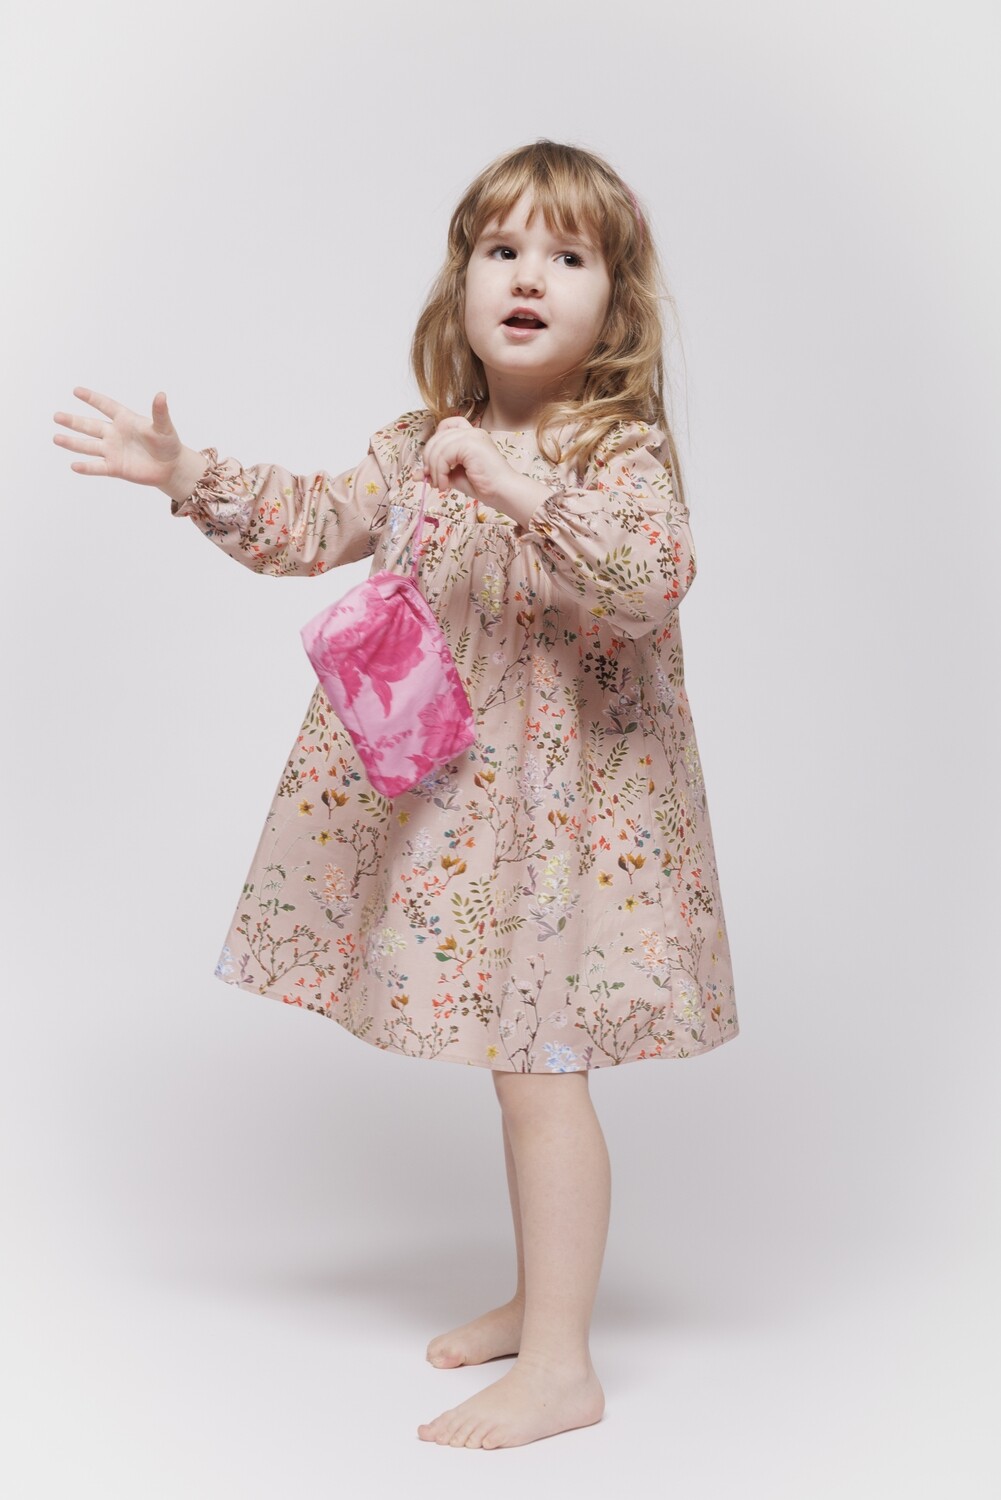 Lovely pale rose floral dress 100% Eco Cotton